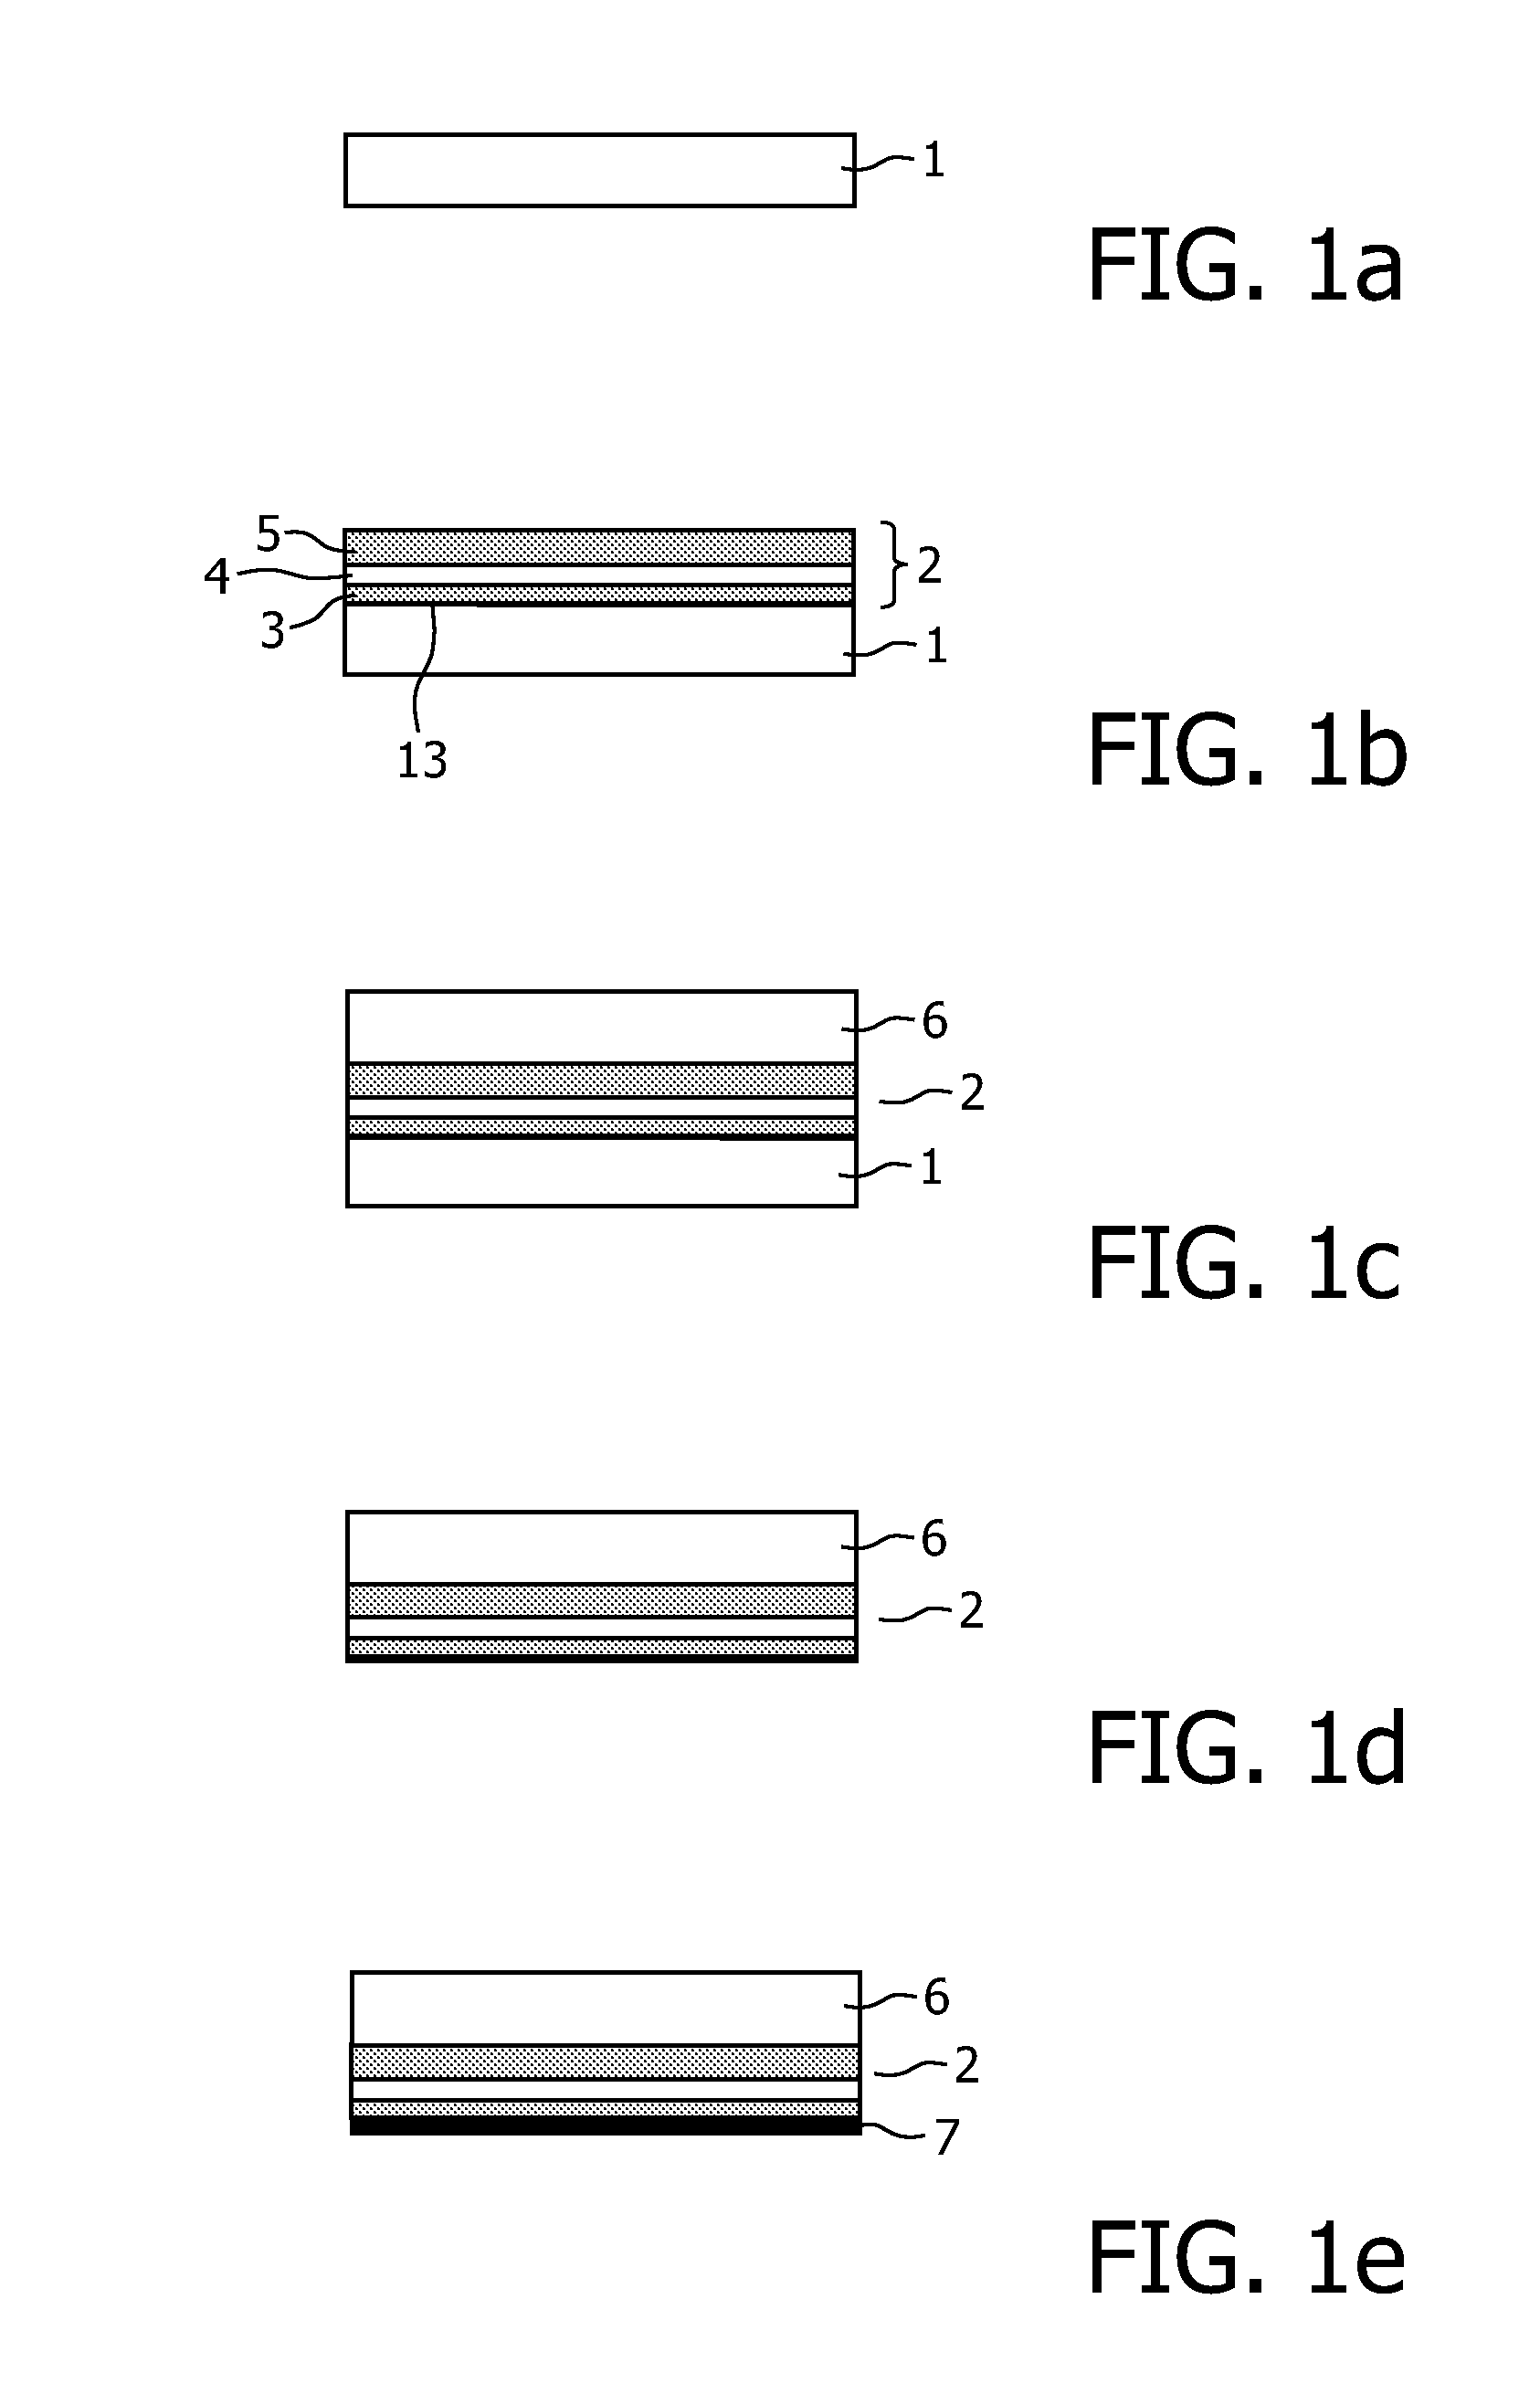 Vertical extended cavity surface emission laser and method for manufacturing a light emitting component of the same